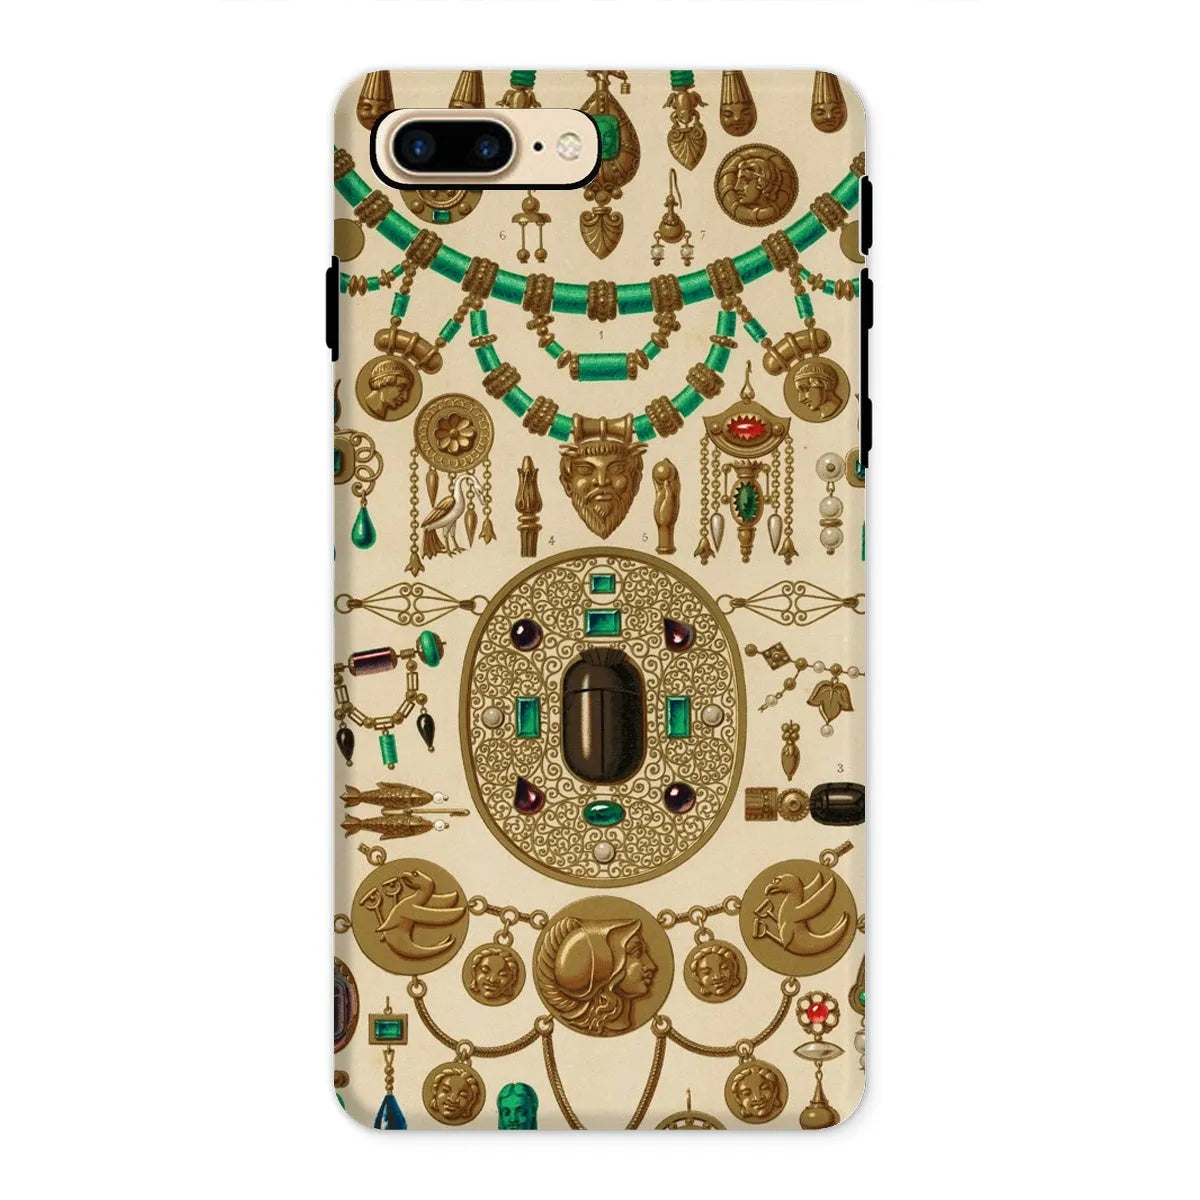 Etruscan Patterns From L’ornement Polychrome By Auguste Racinet Tough Phone Case - Iphone 8 Plus / Matte - Mobile